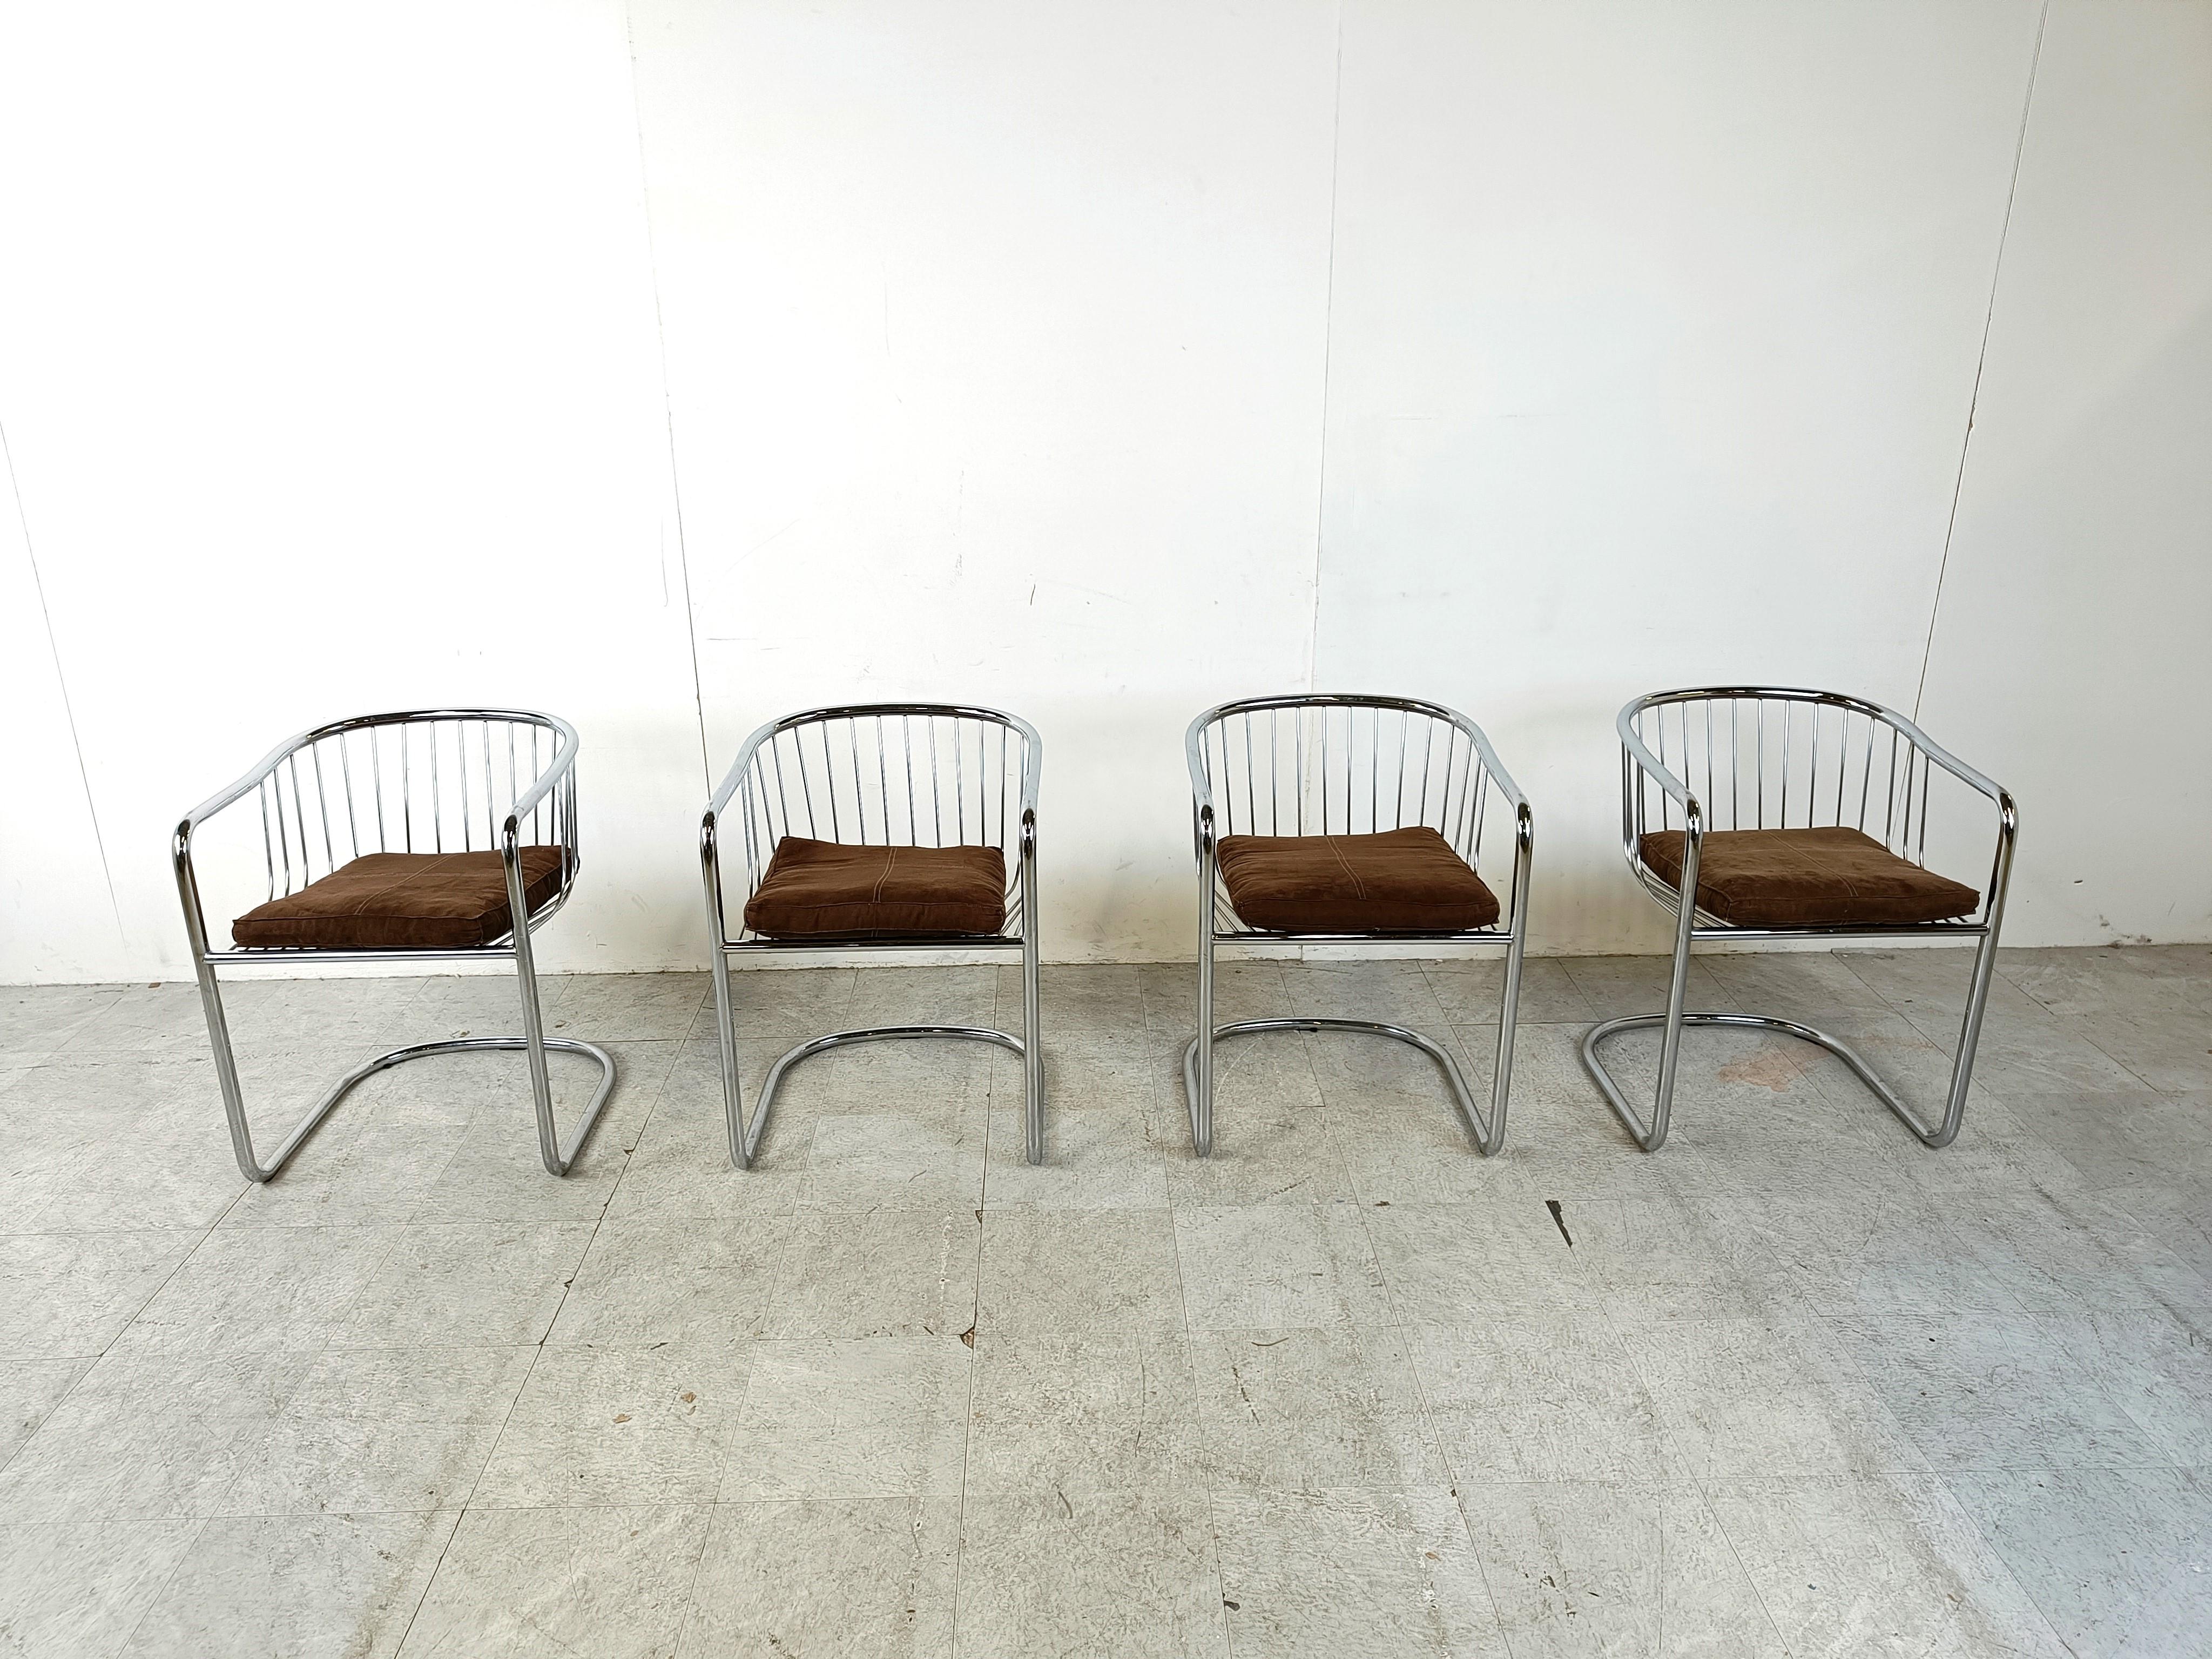 Seventies chromed tubular and chrome wire metal dining chairs with a cantilever base.

These German made dining chairs are often attributed to Gastone Rinaldi.

The cantilever design and the use of tubular chrome dates back to the 1920s - Bauhaus